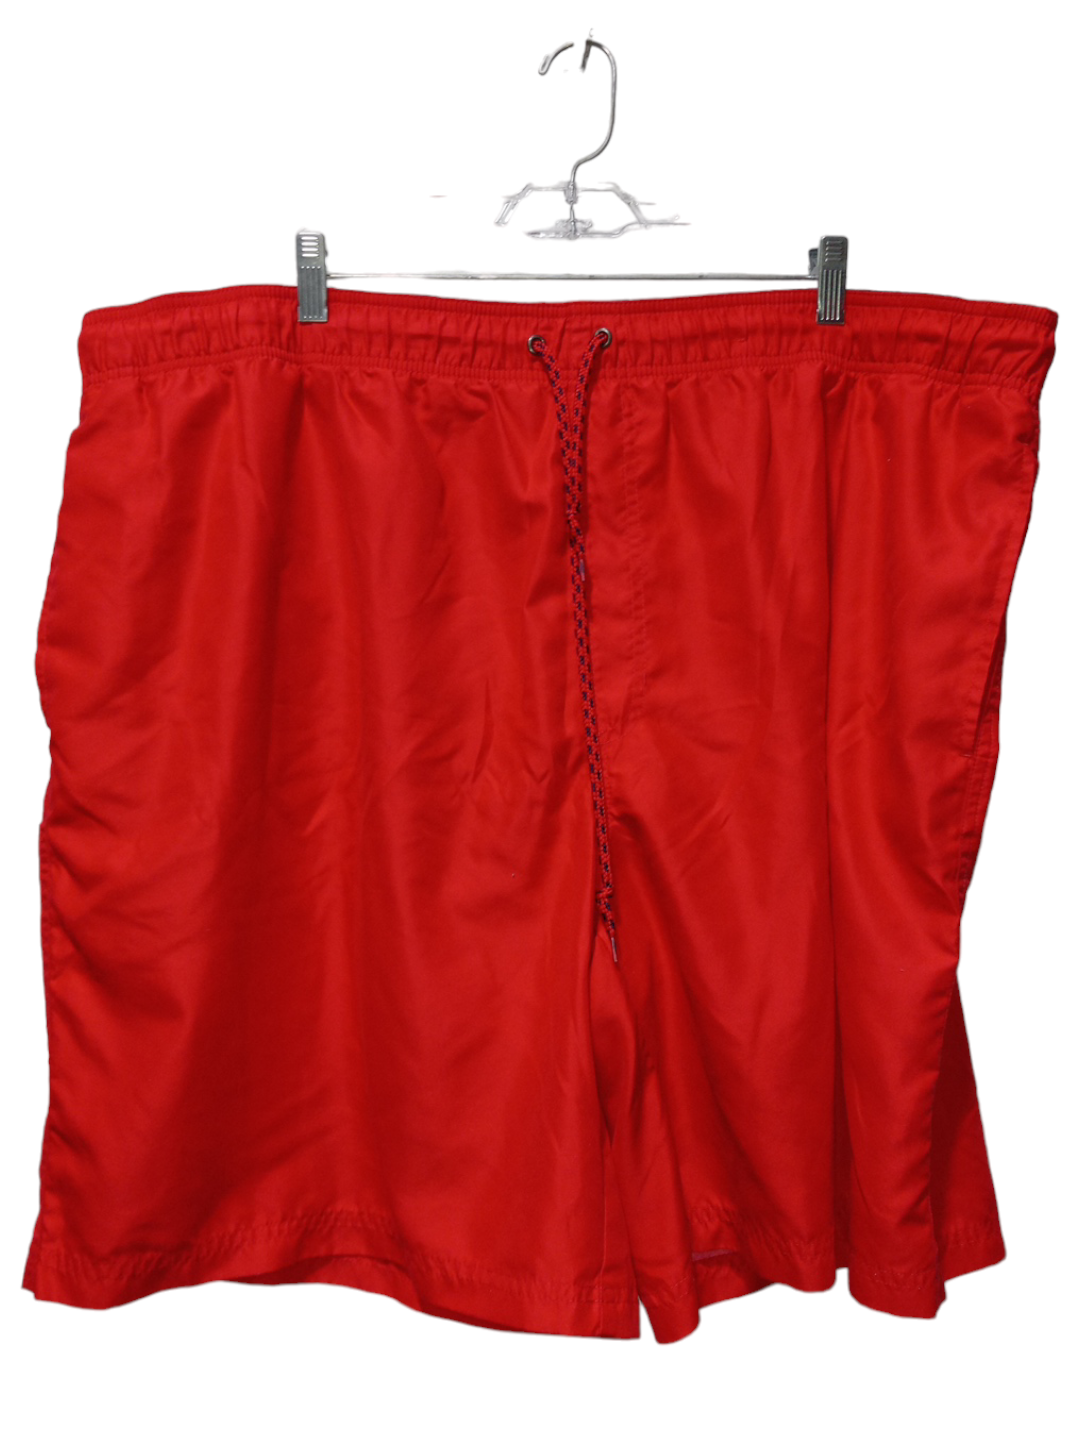 Red Athletic Shorts Op, Size 2x